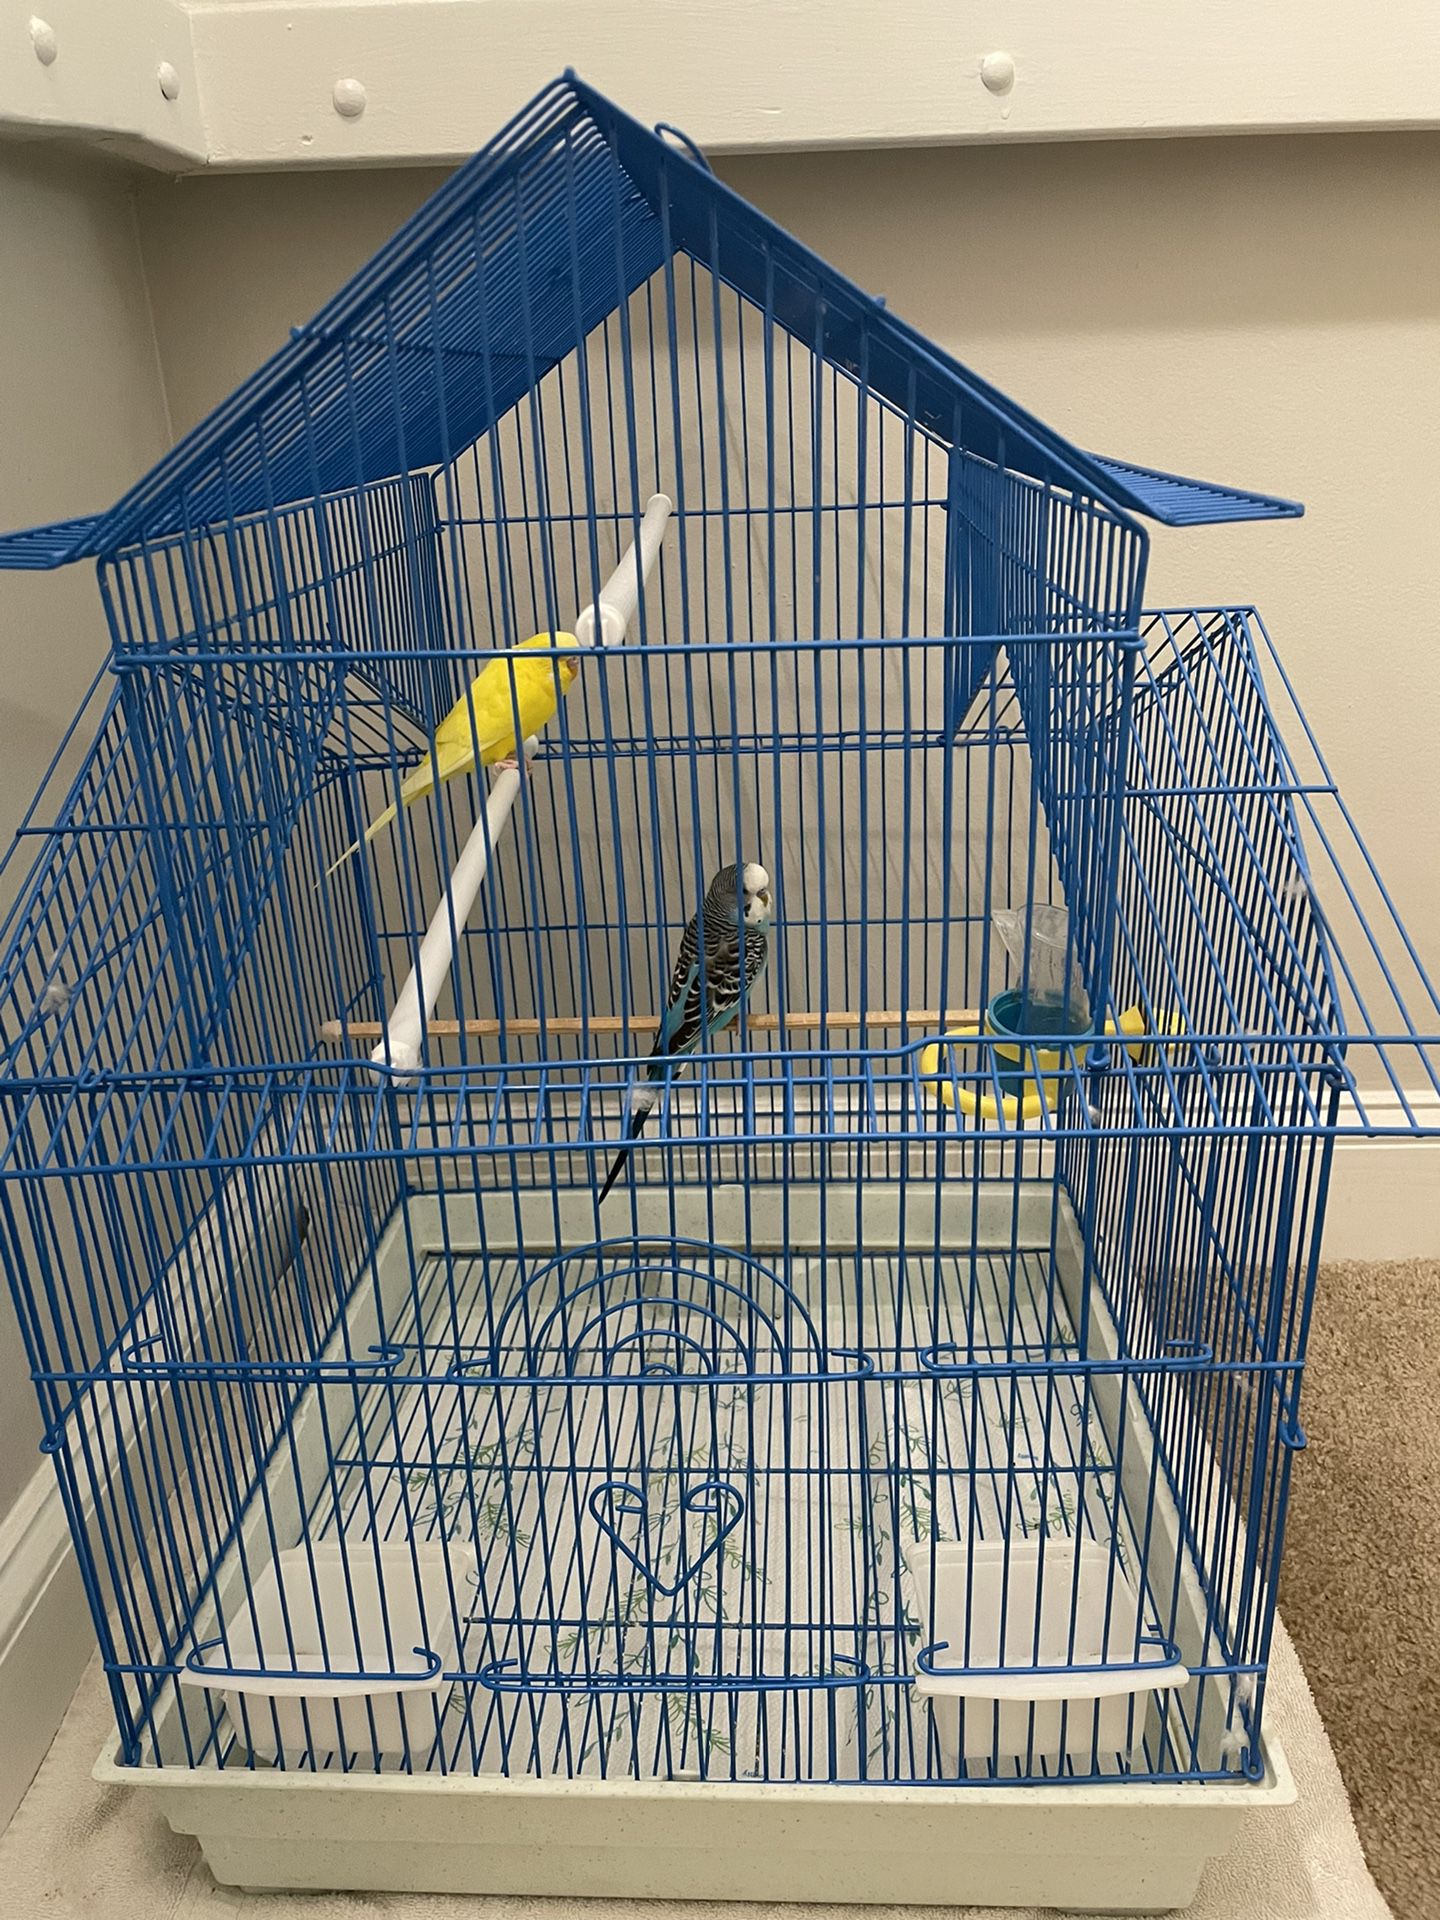 Pereekets, cage, Toys and food